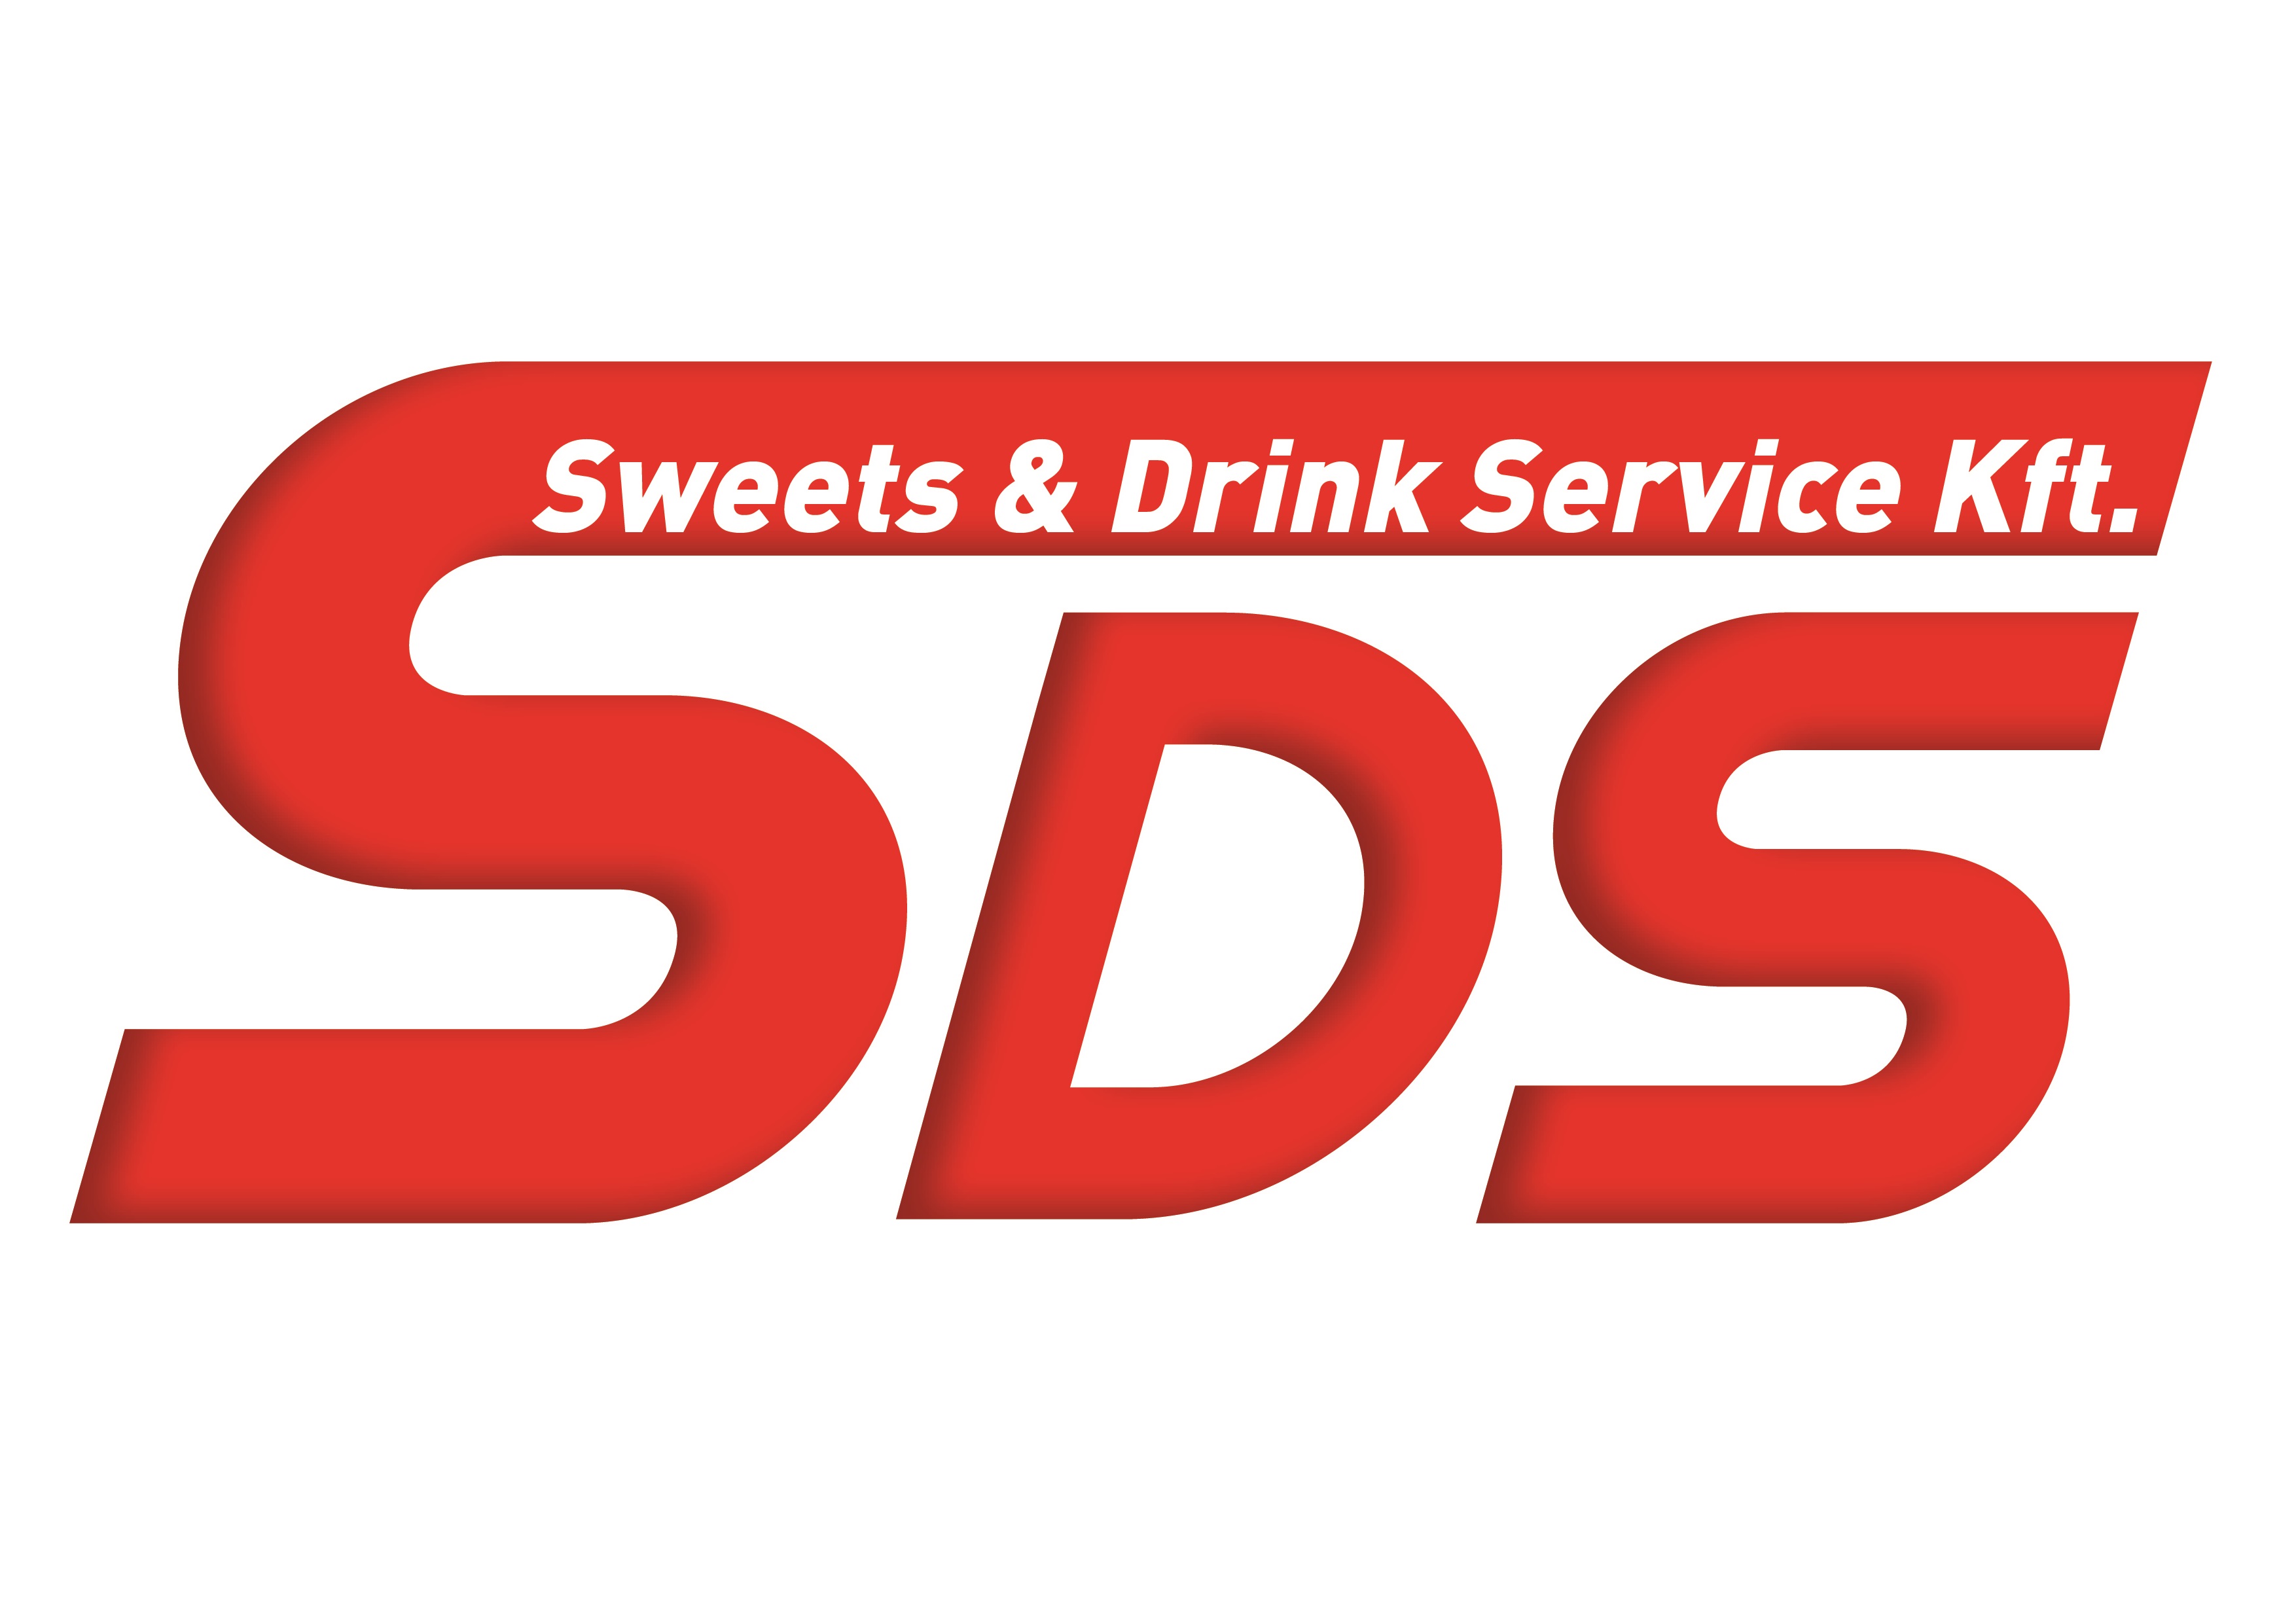 Sweets & Drink Service Kft.